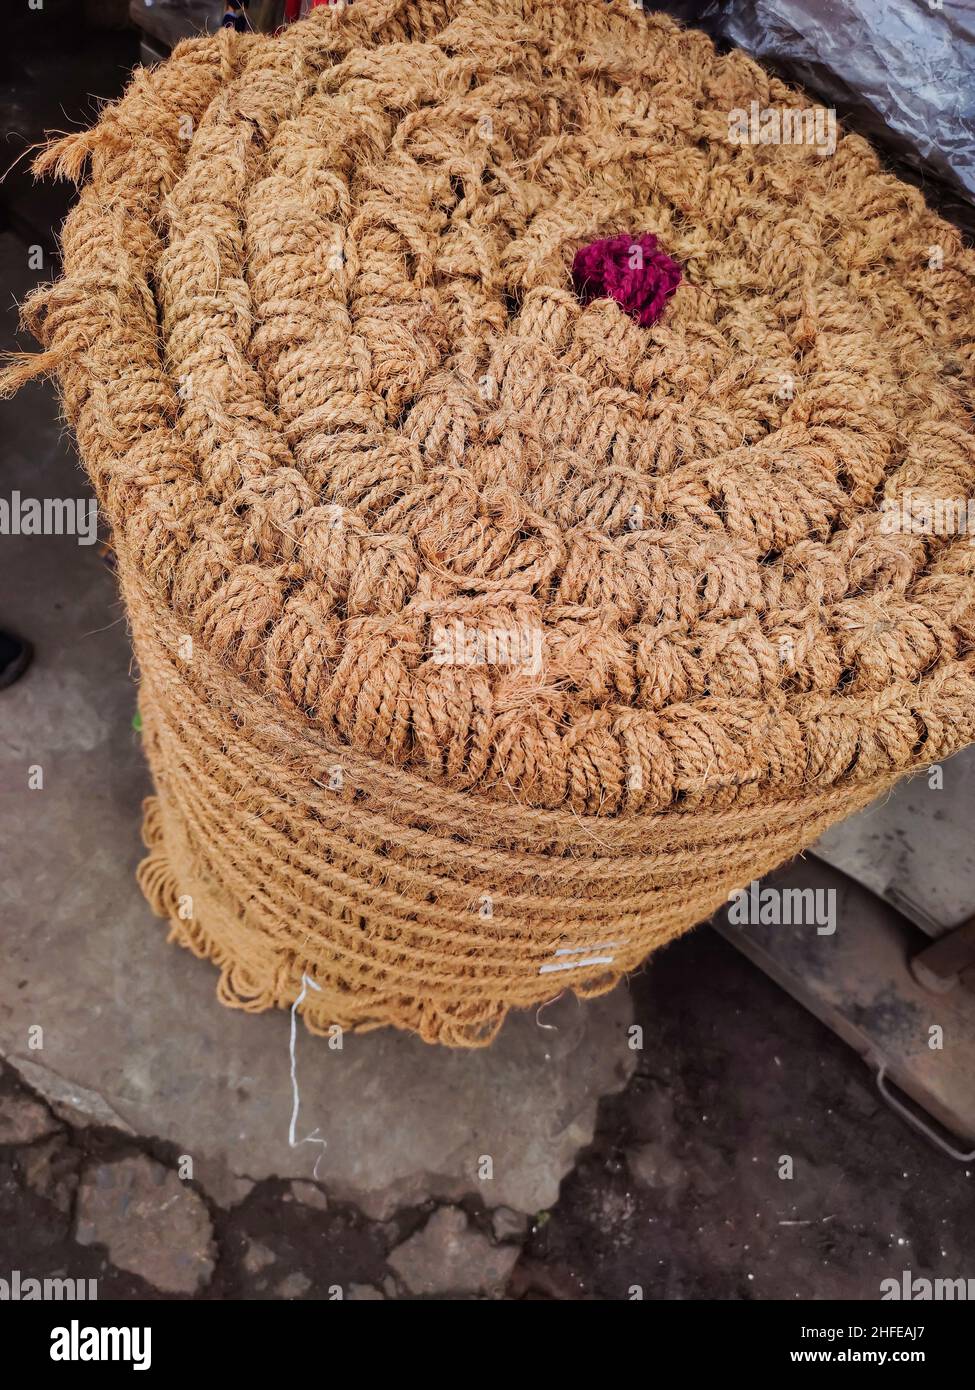 closeup photo of bundle of rope made of coconut husk fibre. kept for sale. Stock Photo